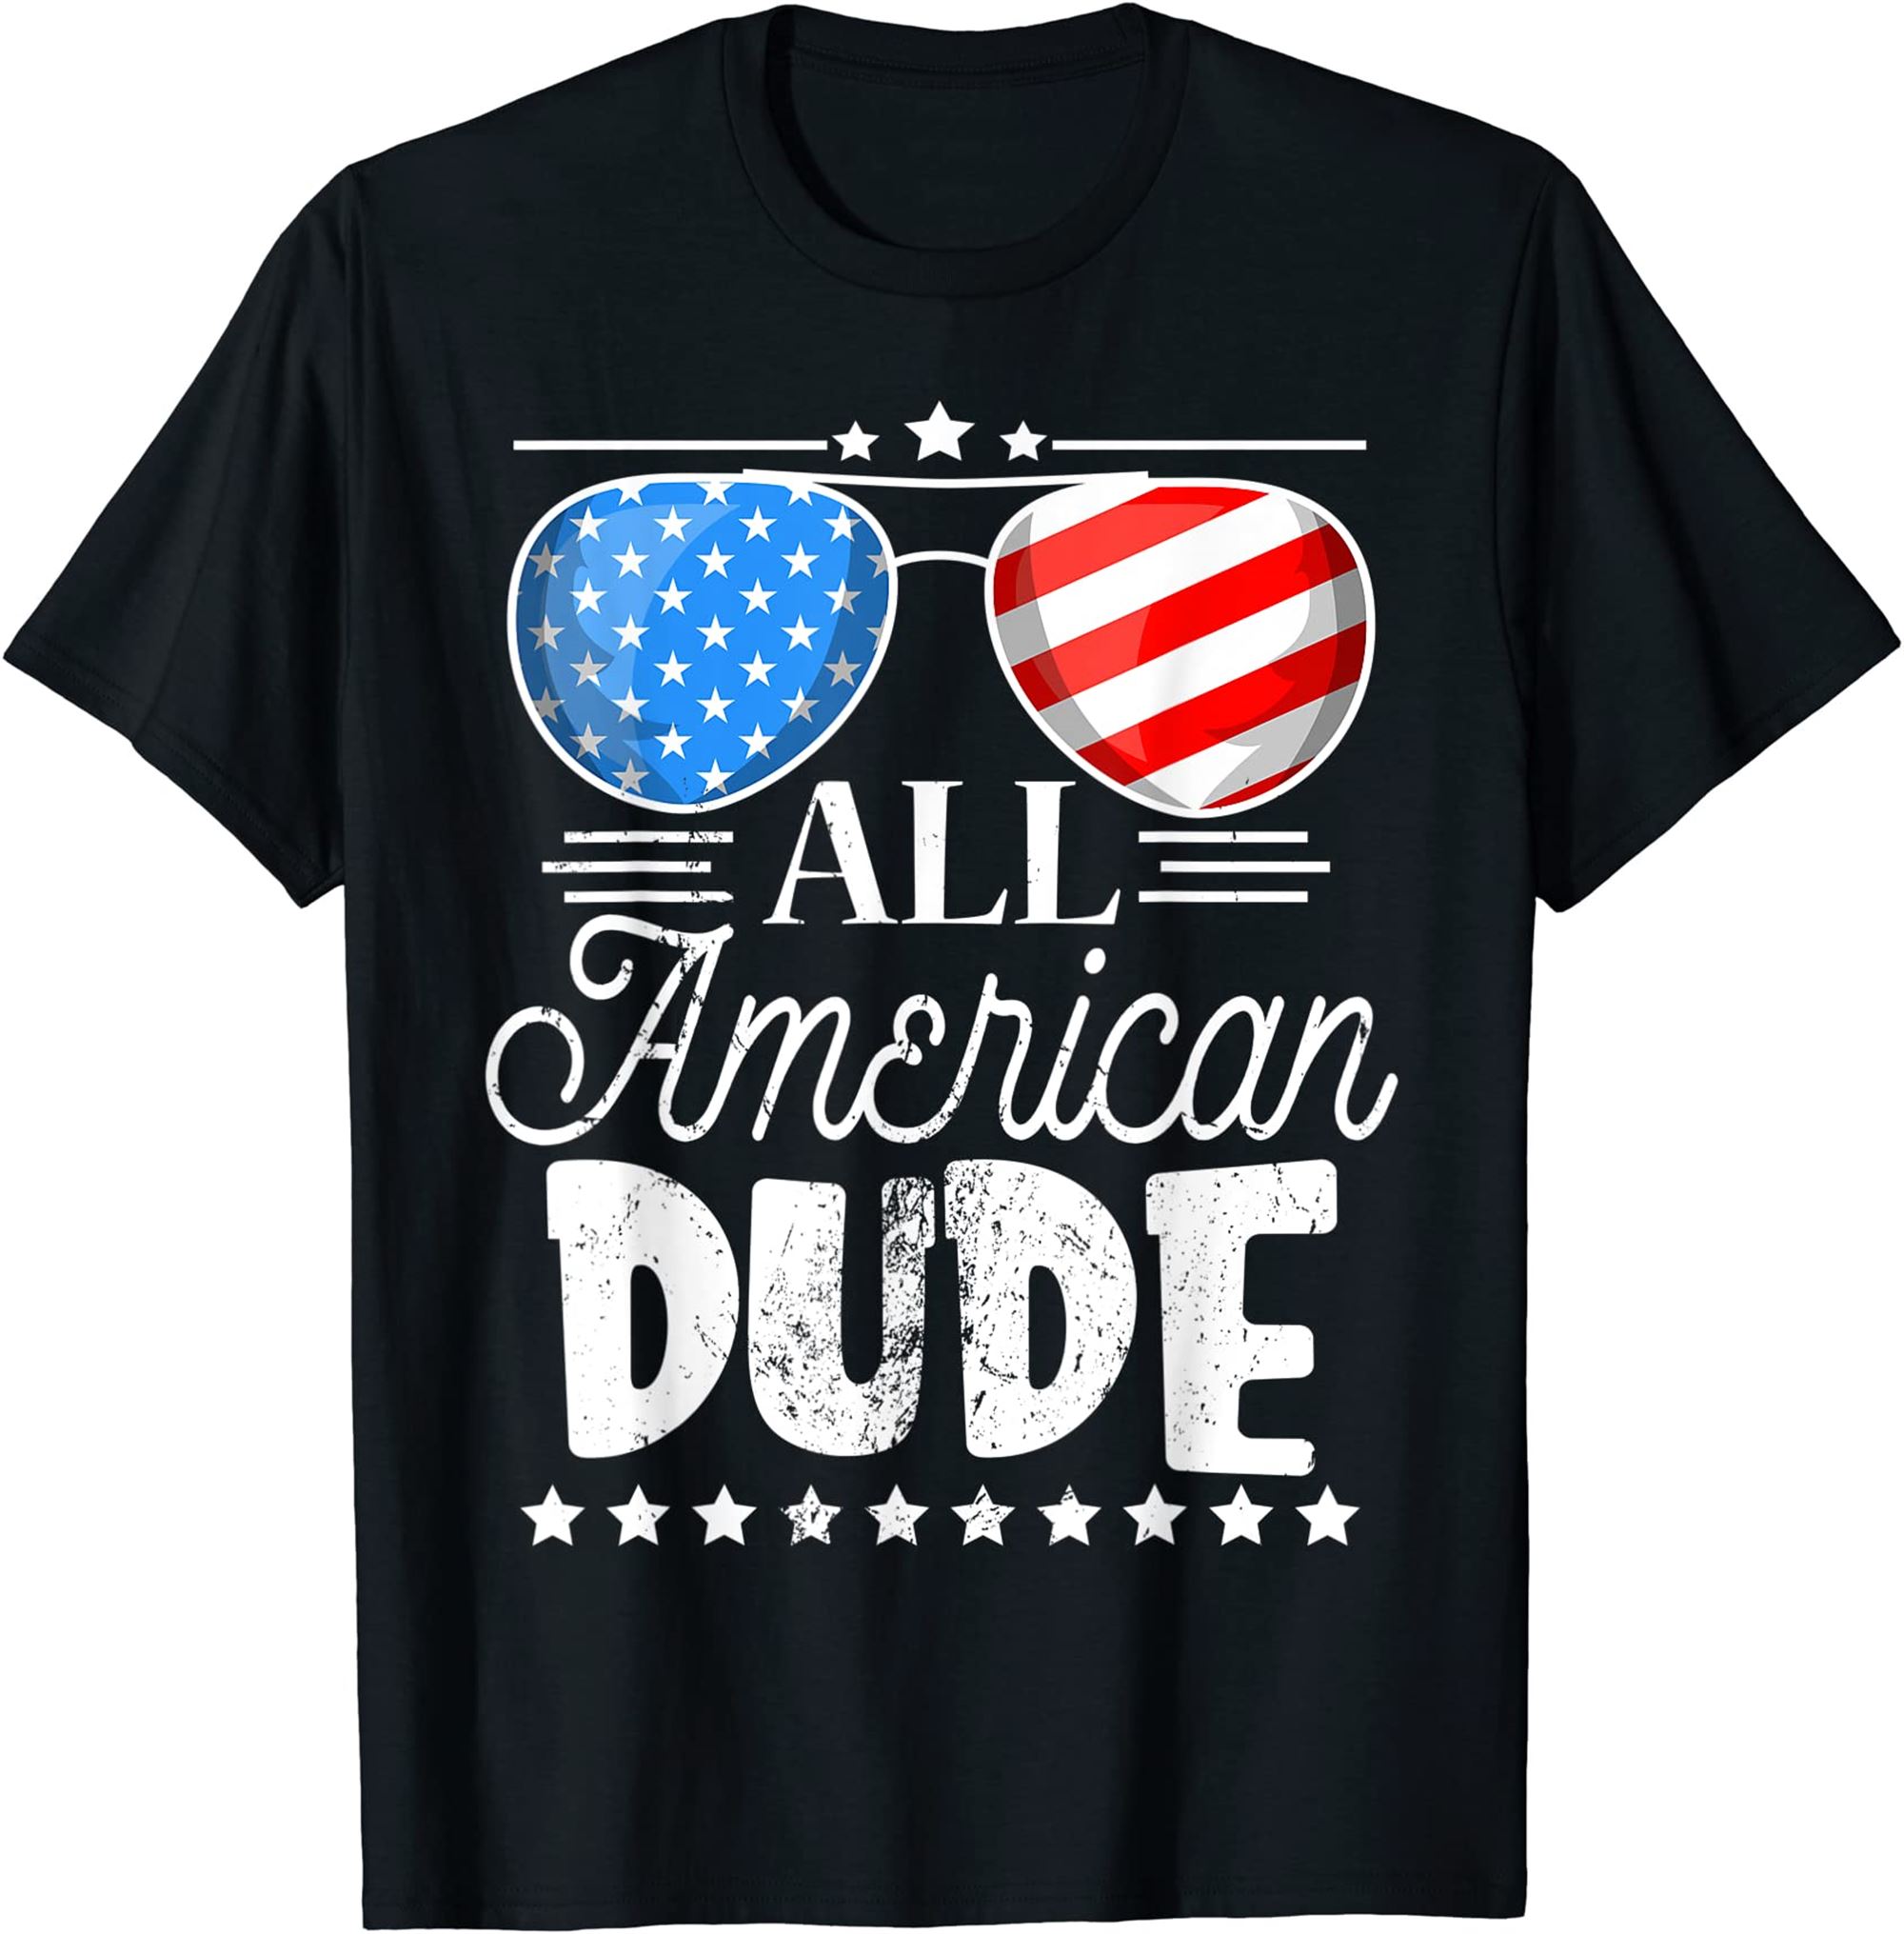 All American Dude 4th Of July Boys Kids Sunglasses Family T-shirt Full Size Up To 5xl